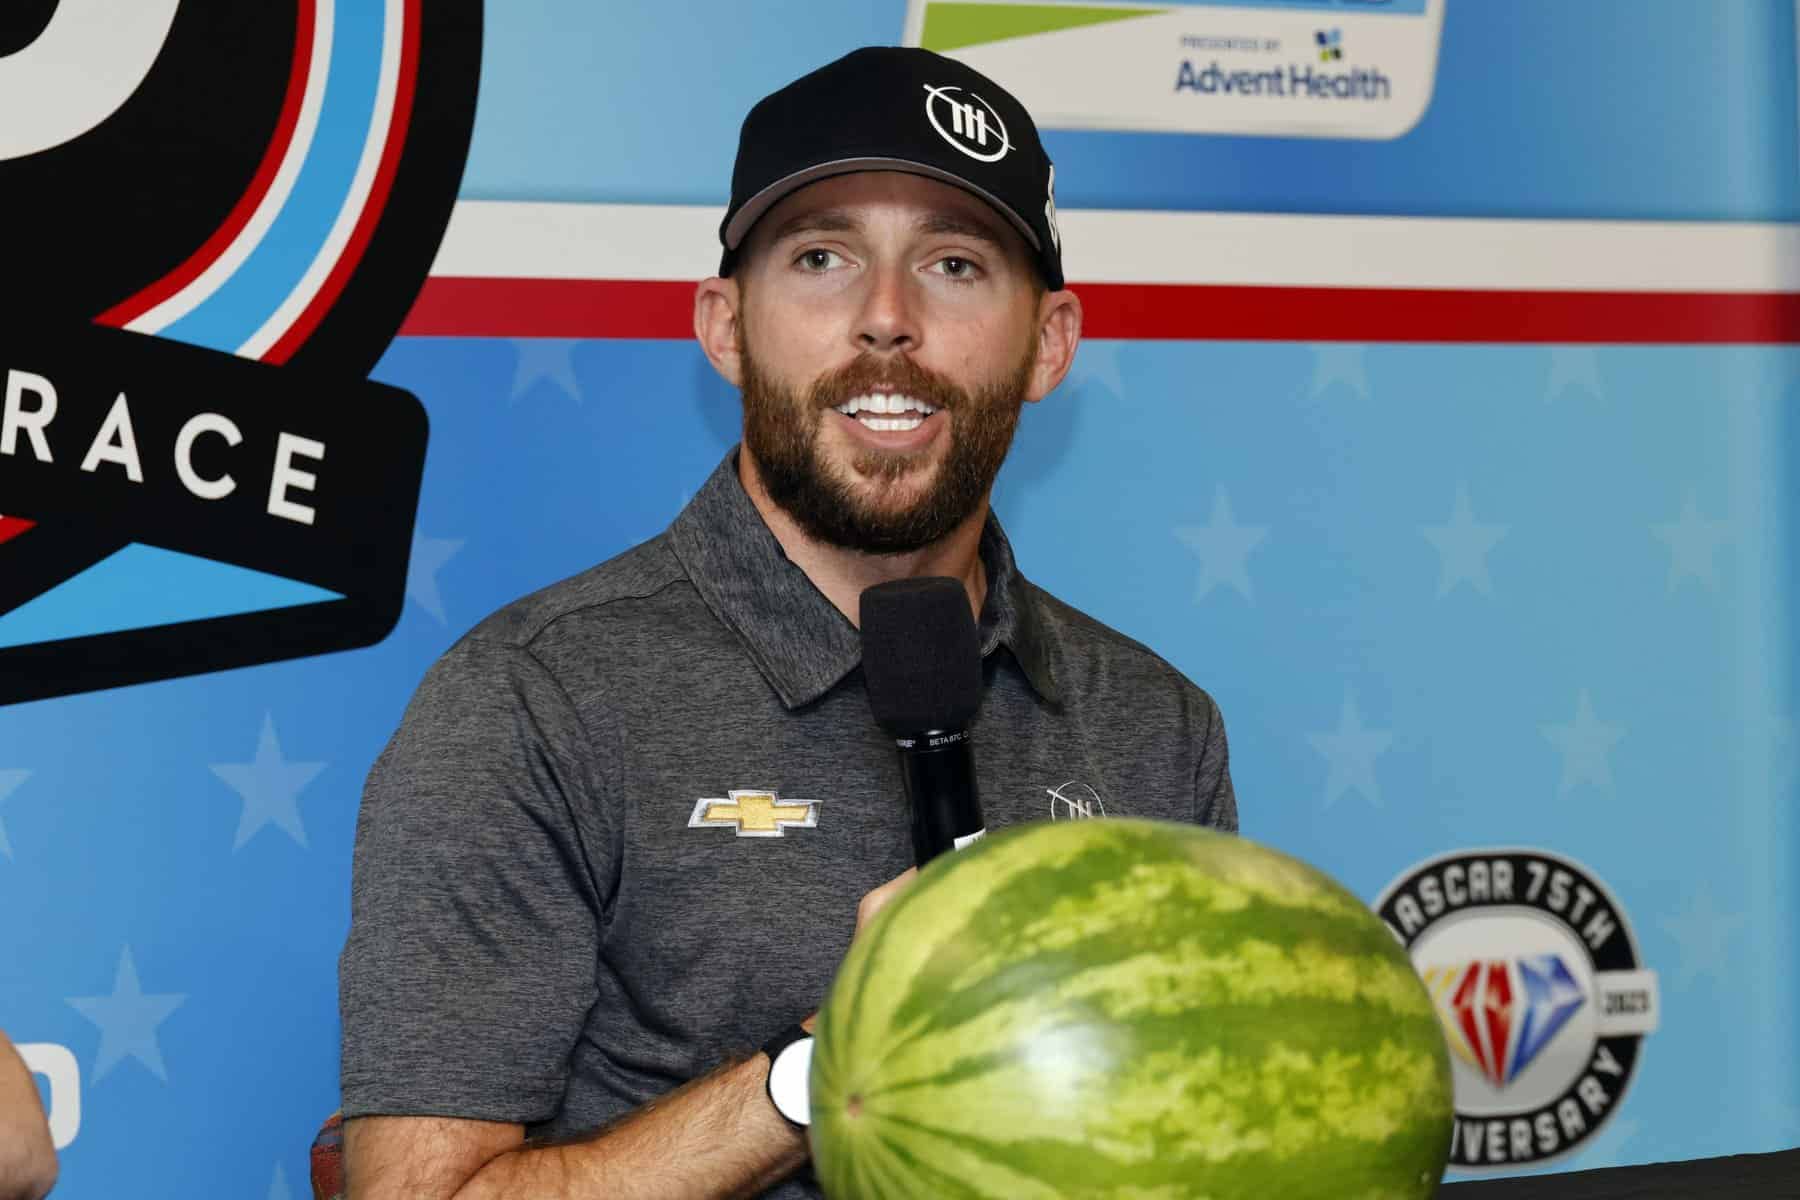 NASCAR's Ambetter Health 400 runs on Sunday. Our expert analyzes the NASCAR betting odds to make his prediction, including Ross Chastain...